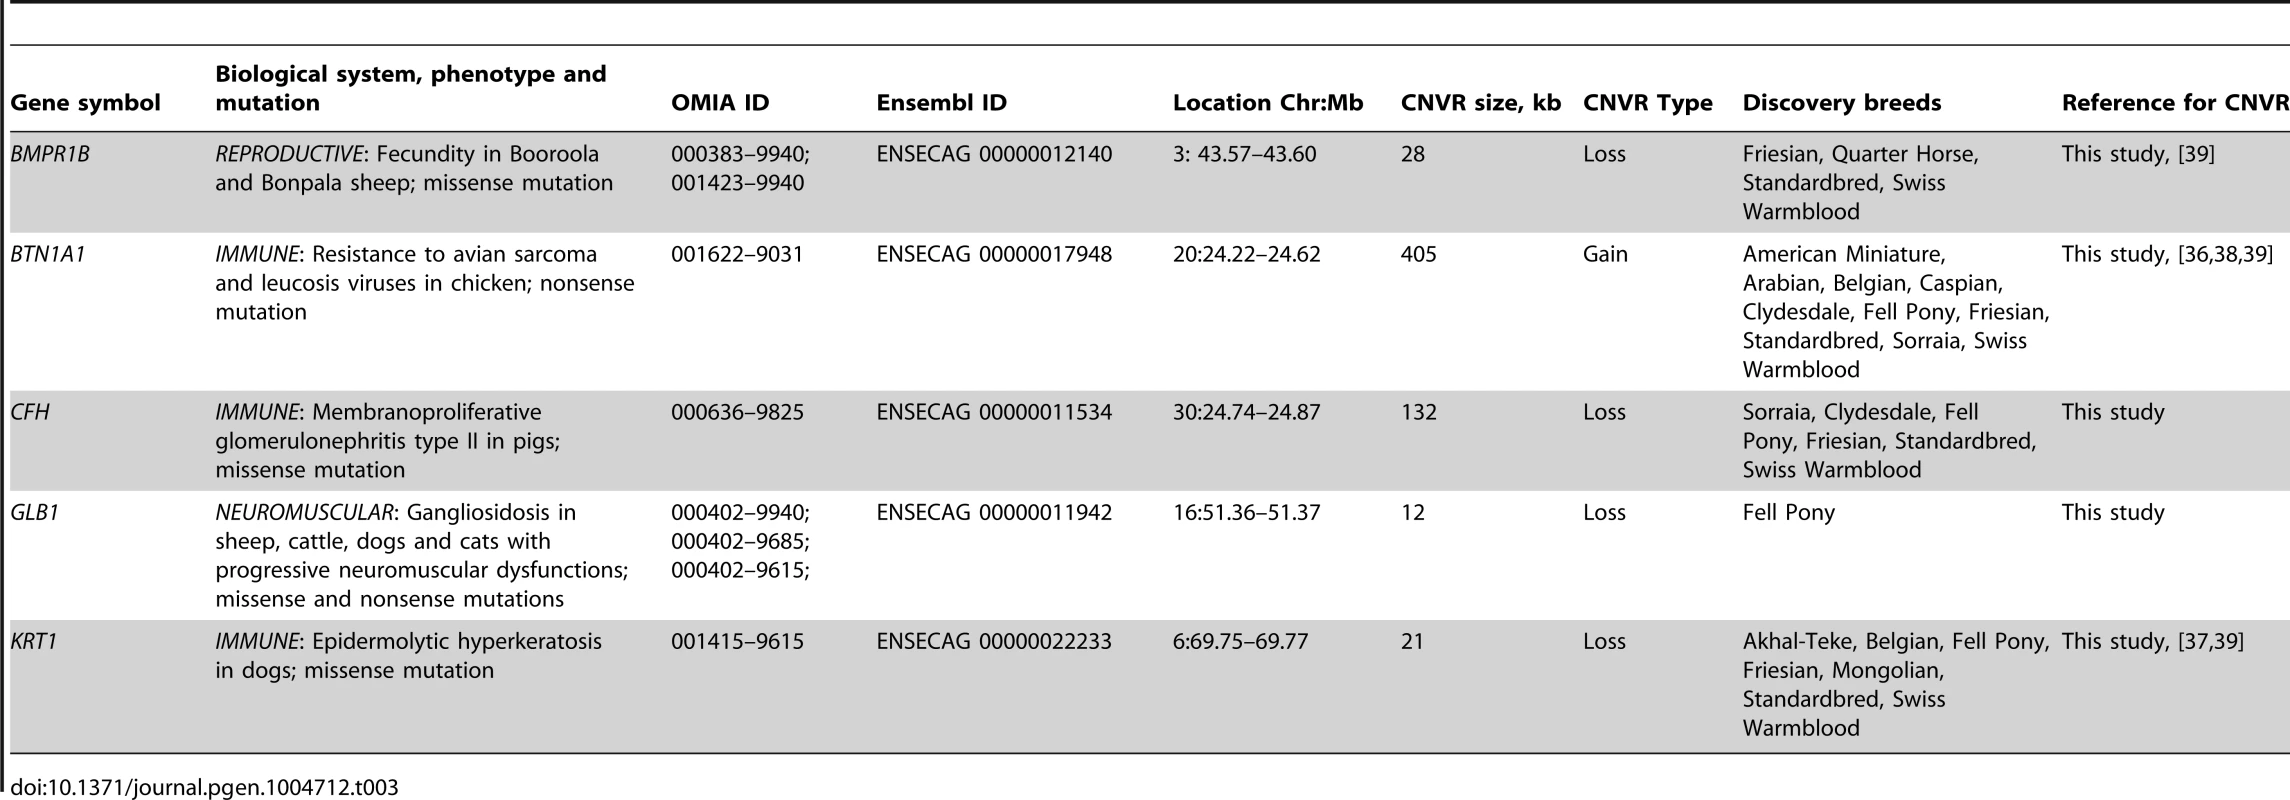 Equine copy number variable genes with known mammalian phenotypes (OMIA; &lt;a href=&quot;http://omia.angis.org.au/home/&quot;&gt;http://omia.angis.org.au/home/&lt;/a&gt;).